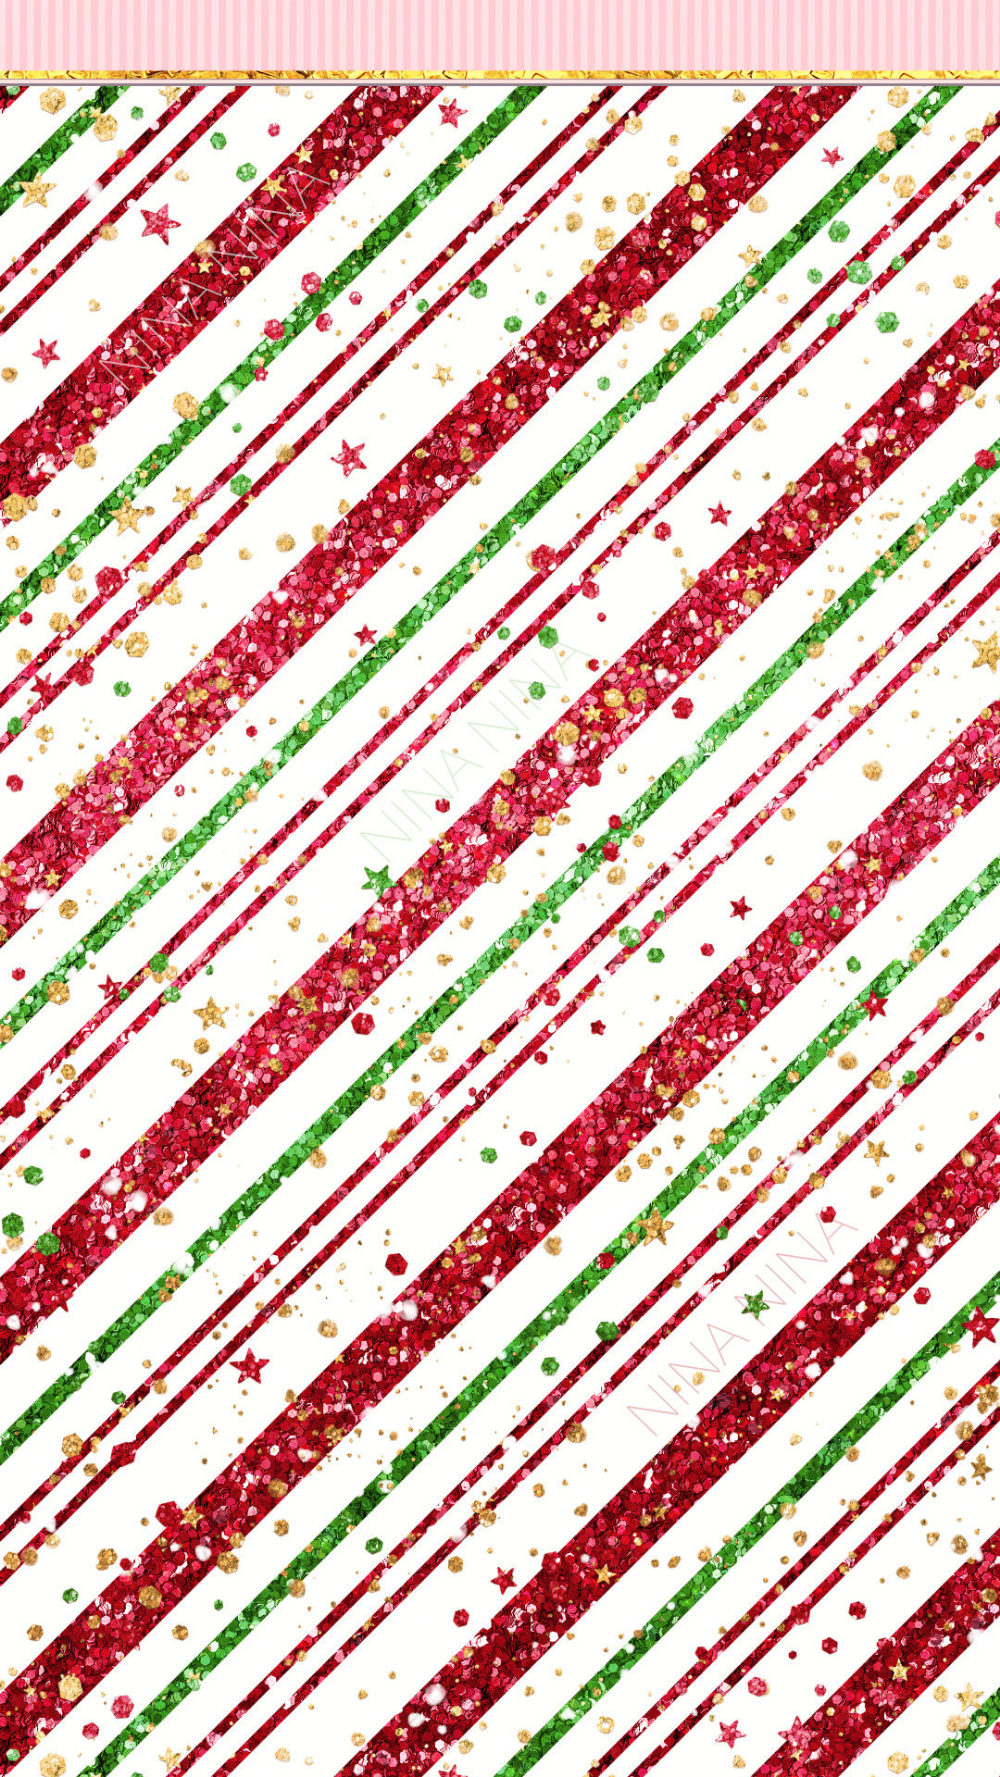 Christmas Gingerbread Digital Paper Pack, Basic Christmas Seamless Patterns, Glitter Stars, Candy Cane Stripes, Cute Xmas Fabric, Red, Gold. Christmas phone wallpaper, Wallpaper iphone christmas, Cute christmas wallpaper